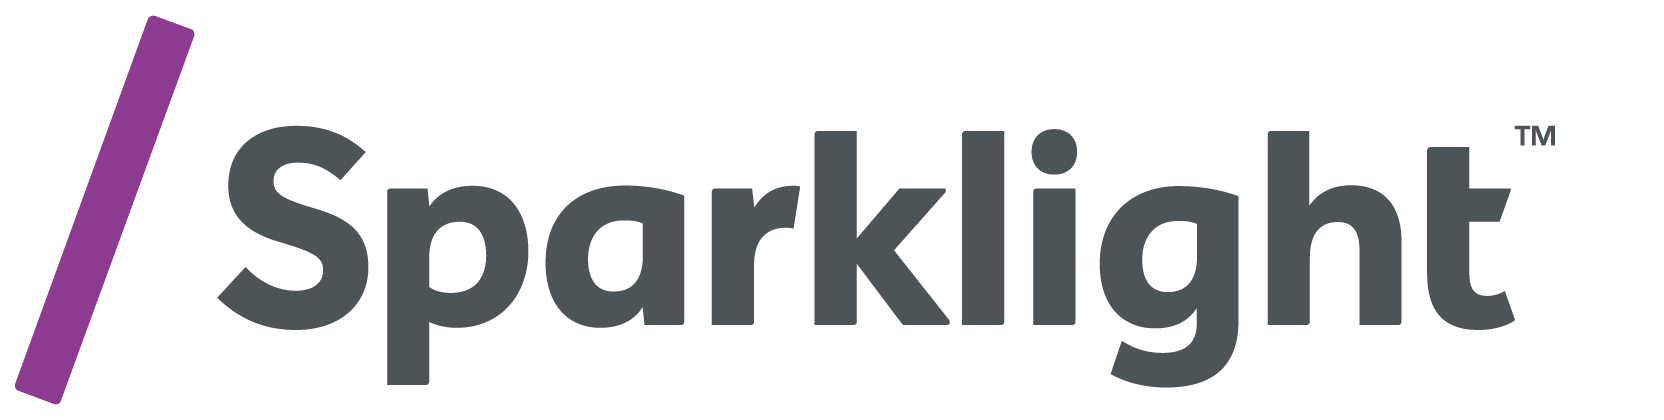 This image shows the Sparklight logo. Sparklight is a sponsor of our Midwest Kid Fest event.